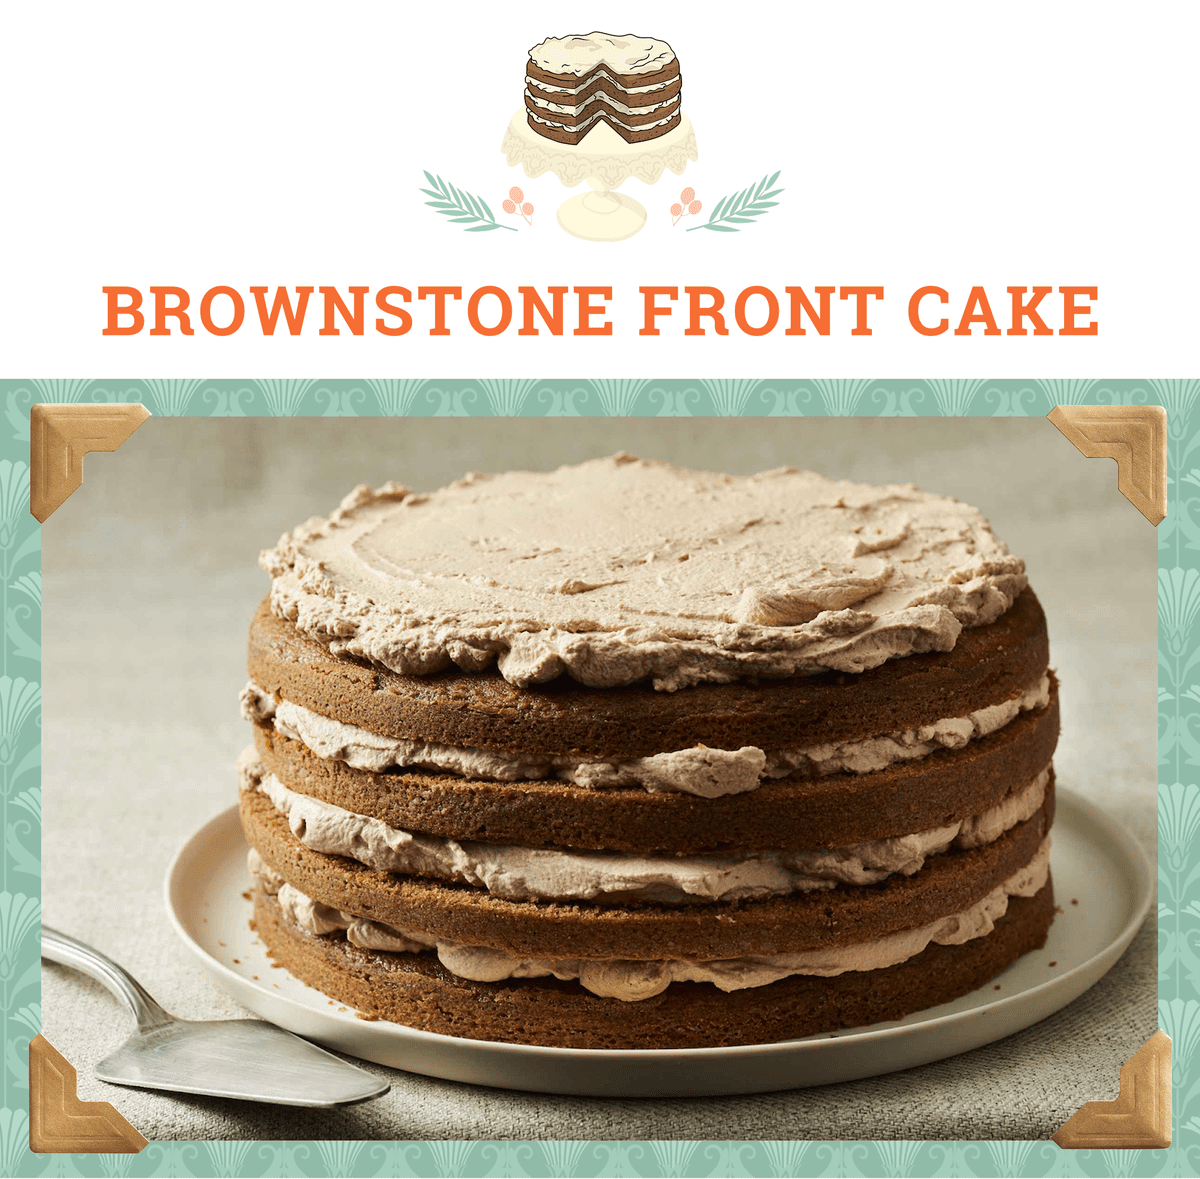 Brownstone Front Cake